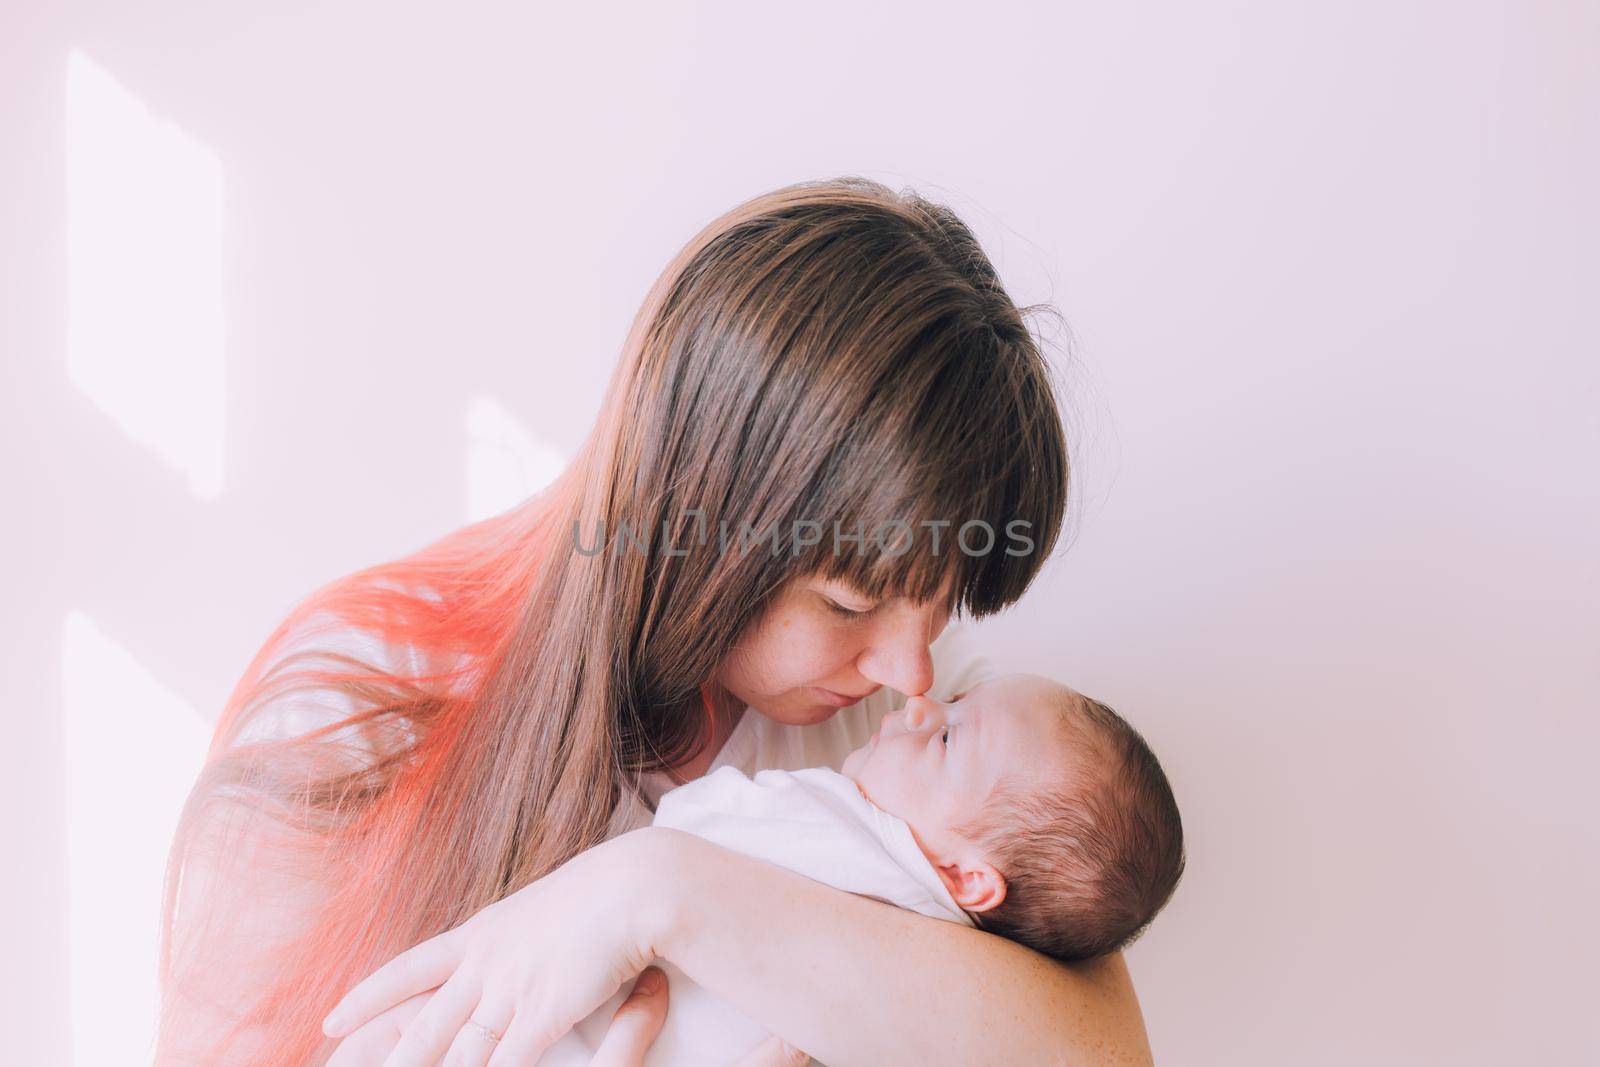 Mom holds the baby in her arms lifestyle . Mother's love for her son. A newborn baby. Mother and child relationship.